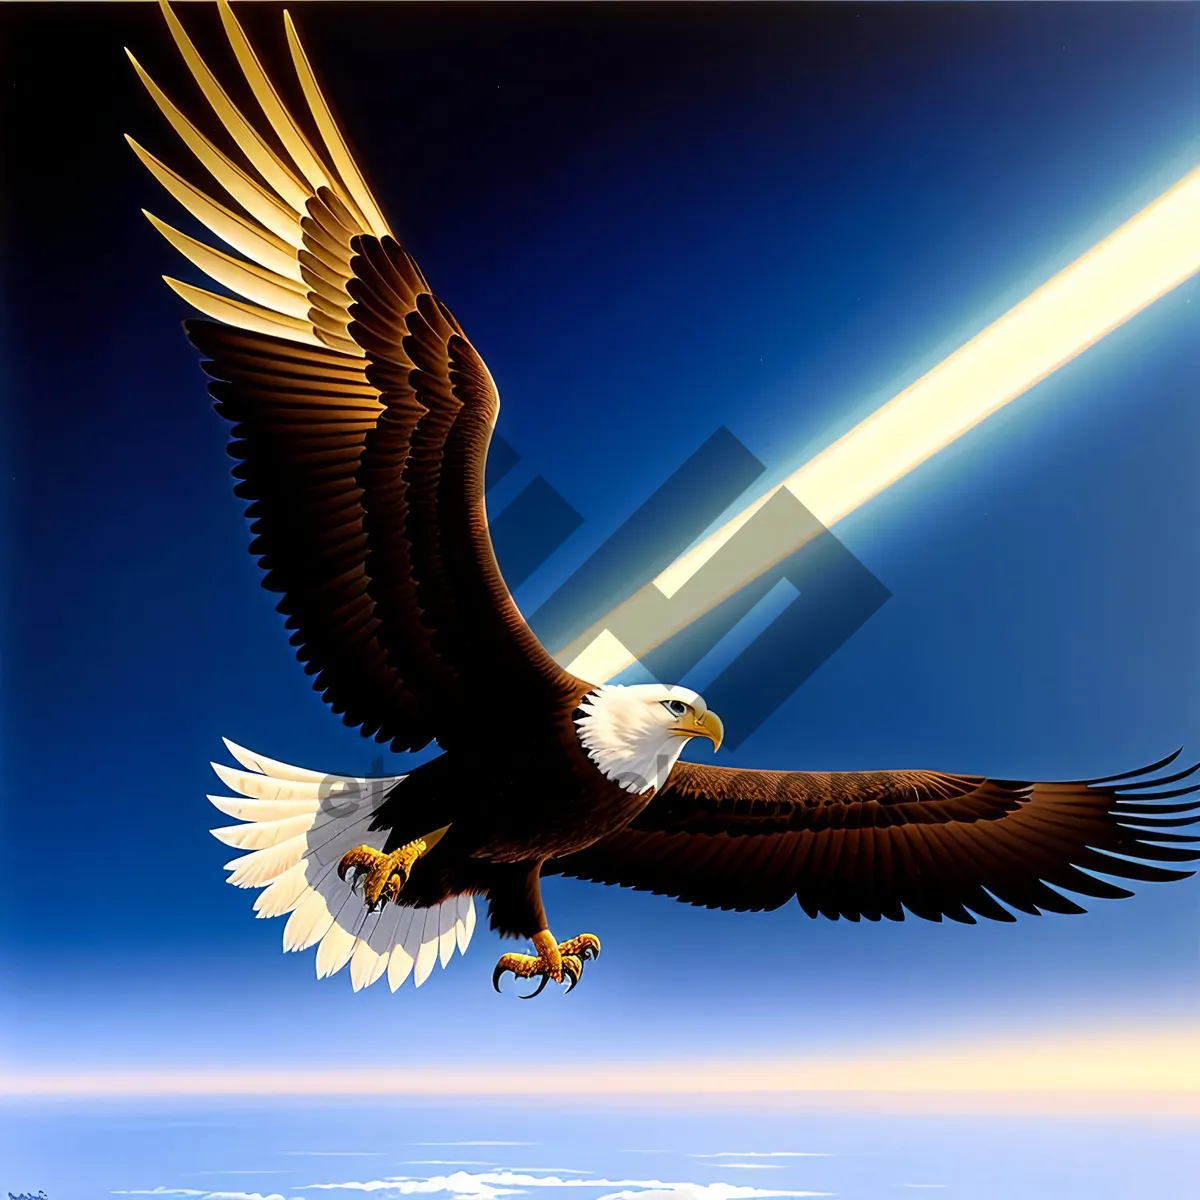 Picture of Graceful Flight: Majestic Bald Eagle Soaring in the Sky